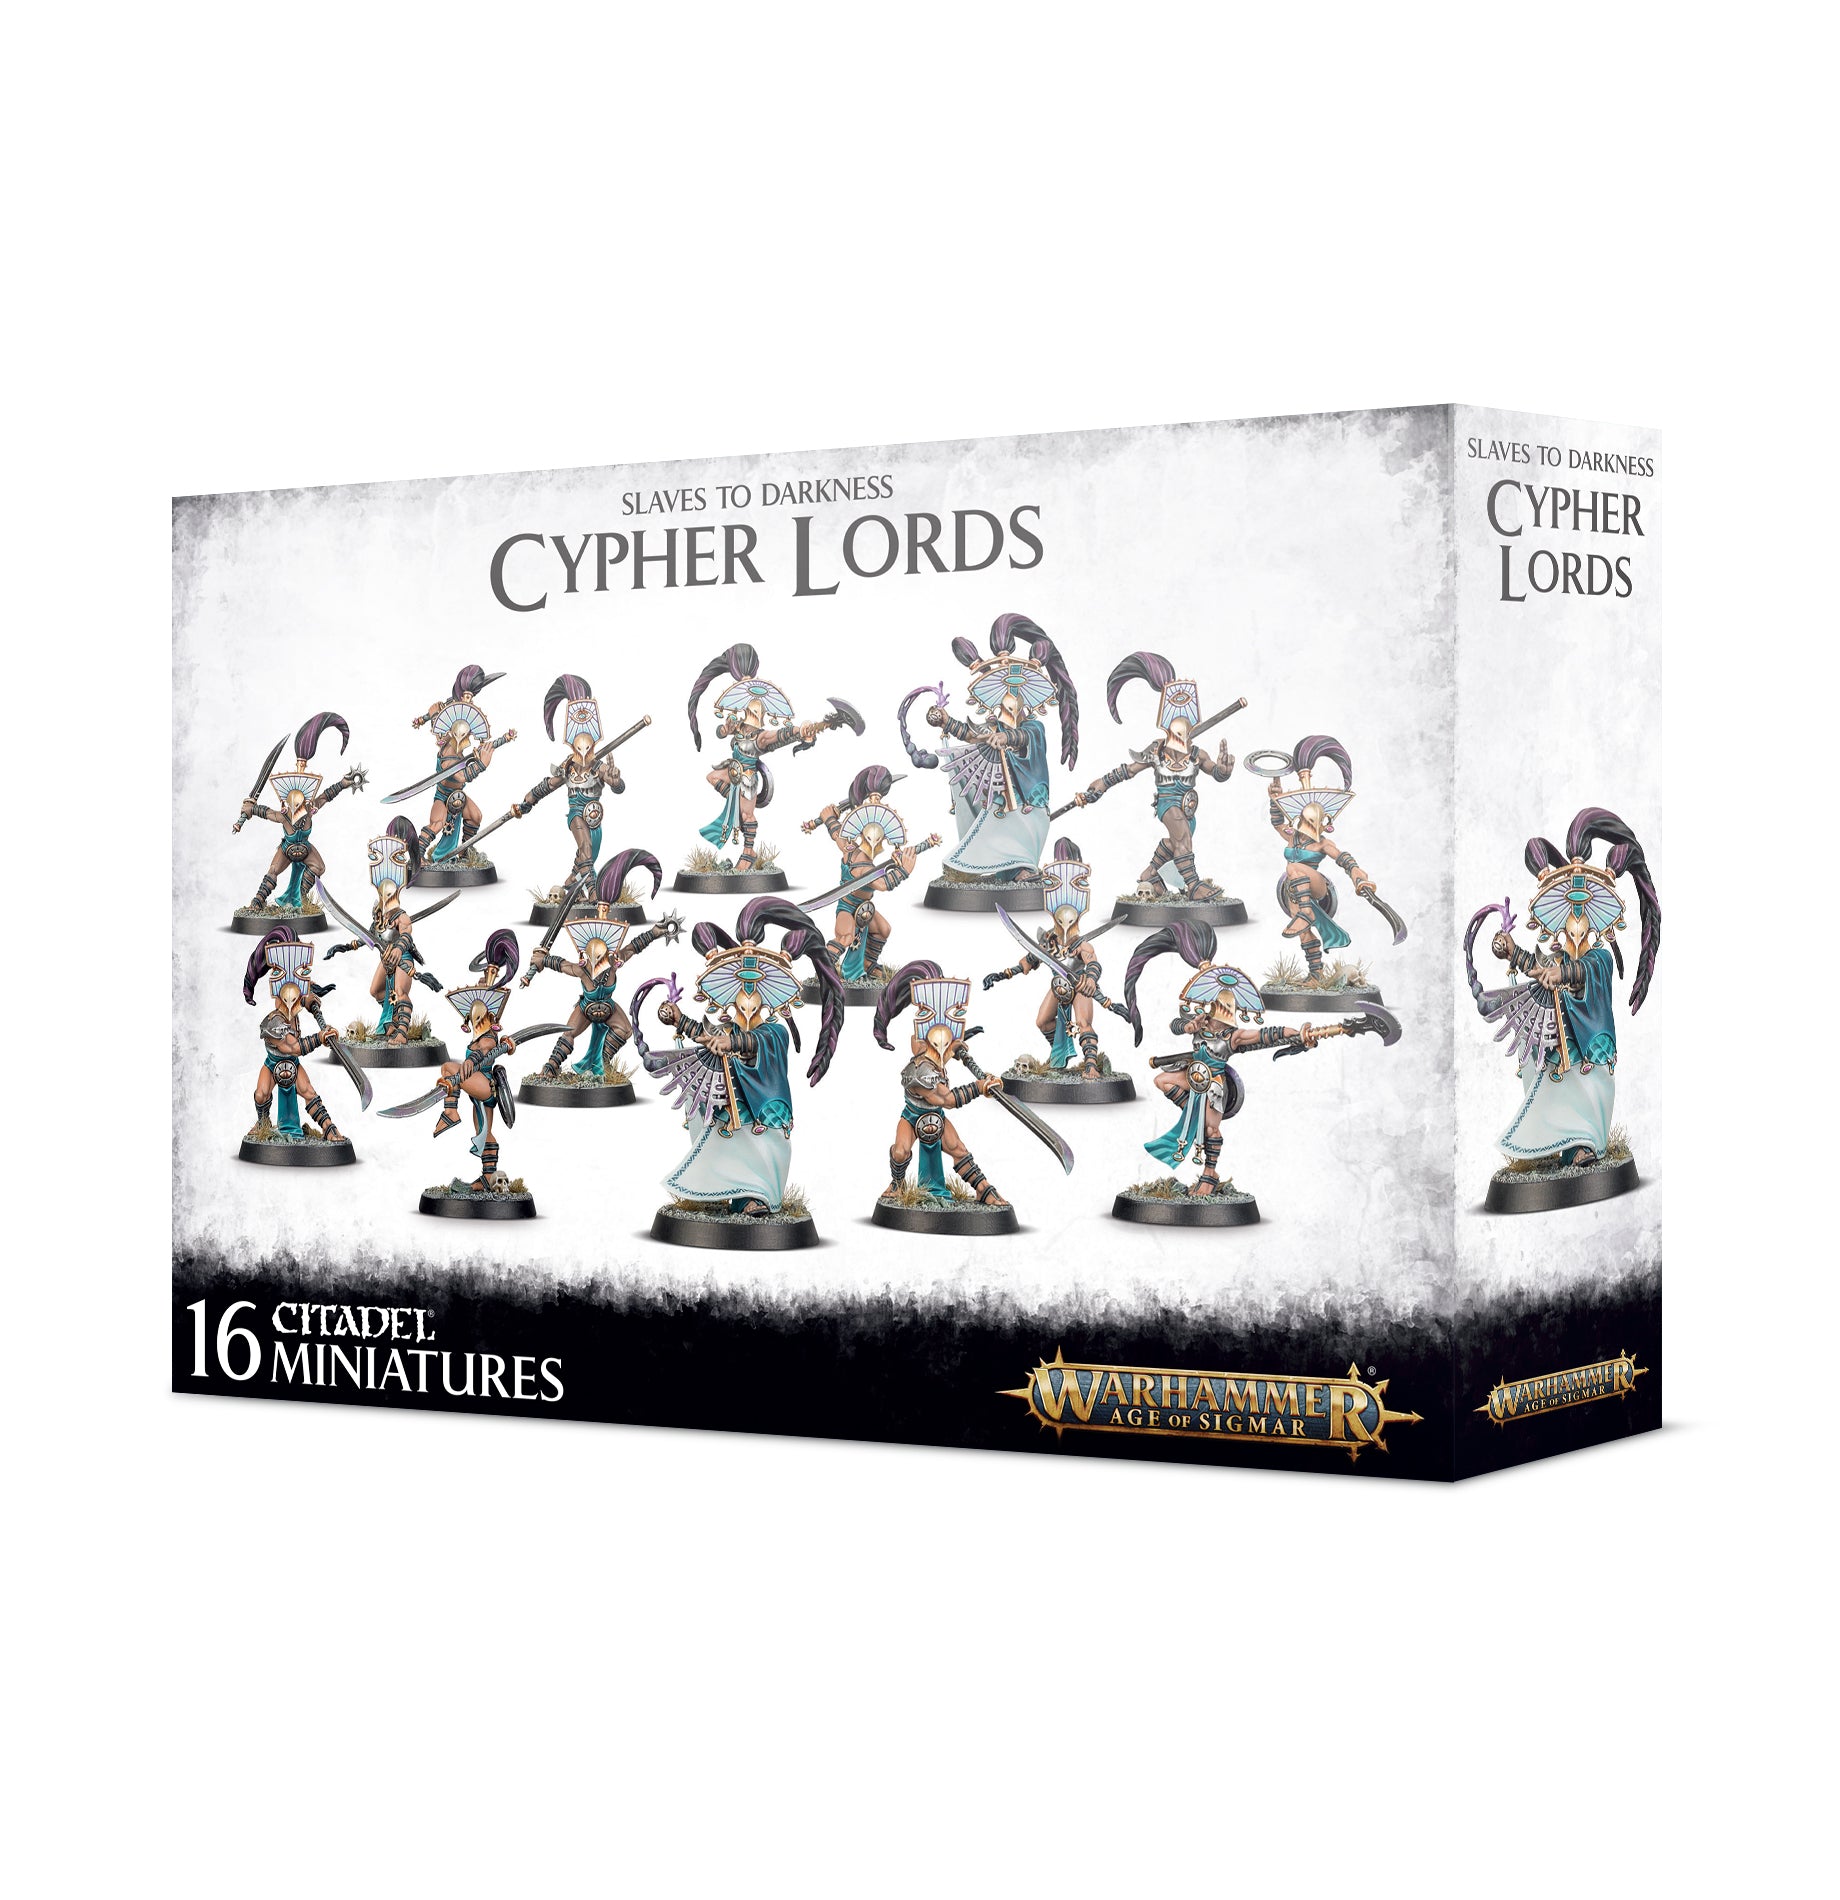 AOS SLAVES TO DARKNESS - CYPHER LORDS | BD Cosmos